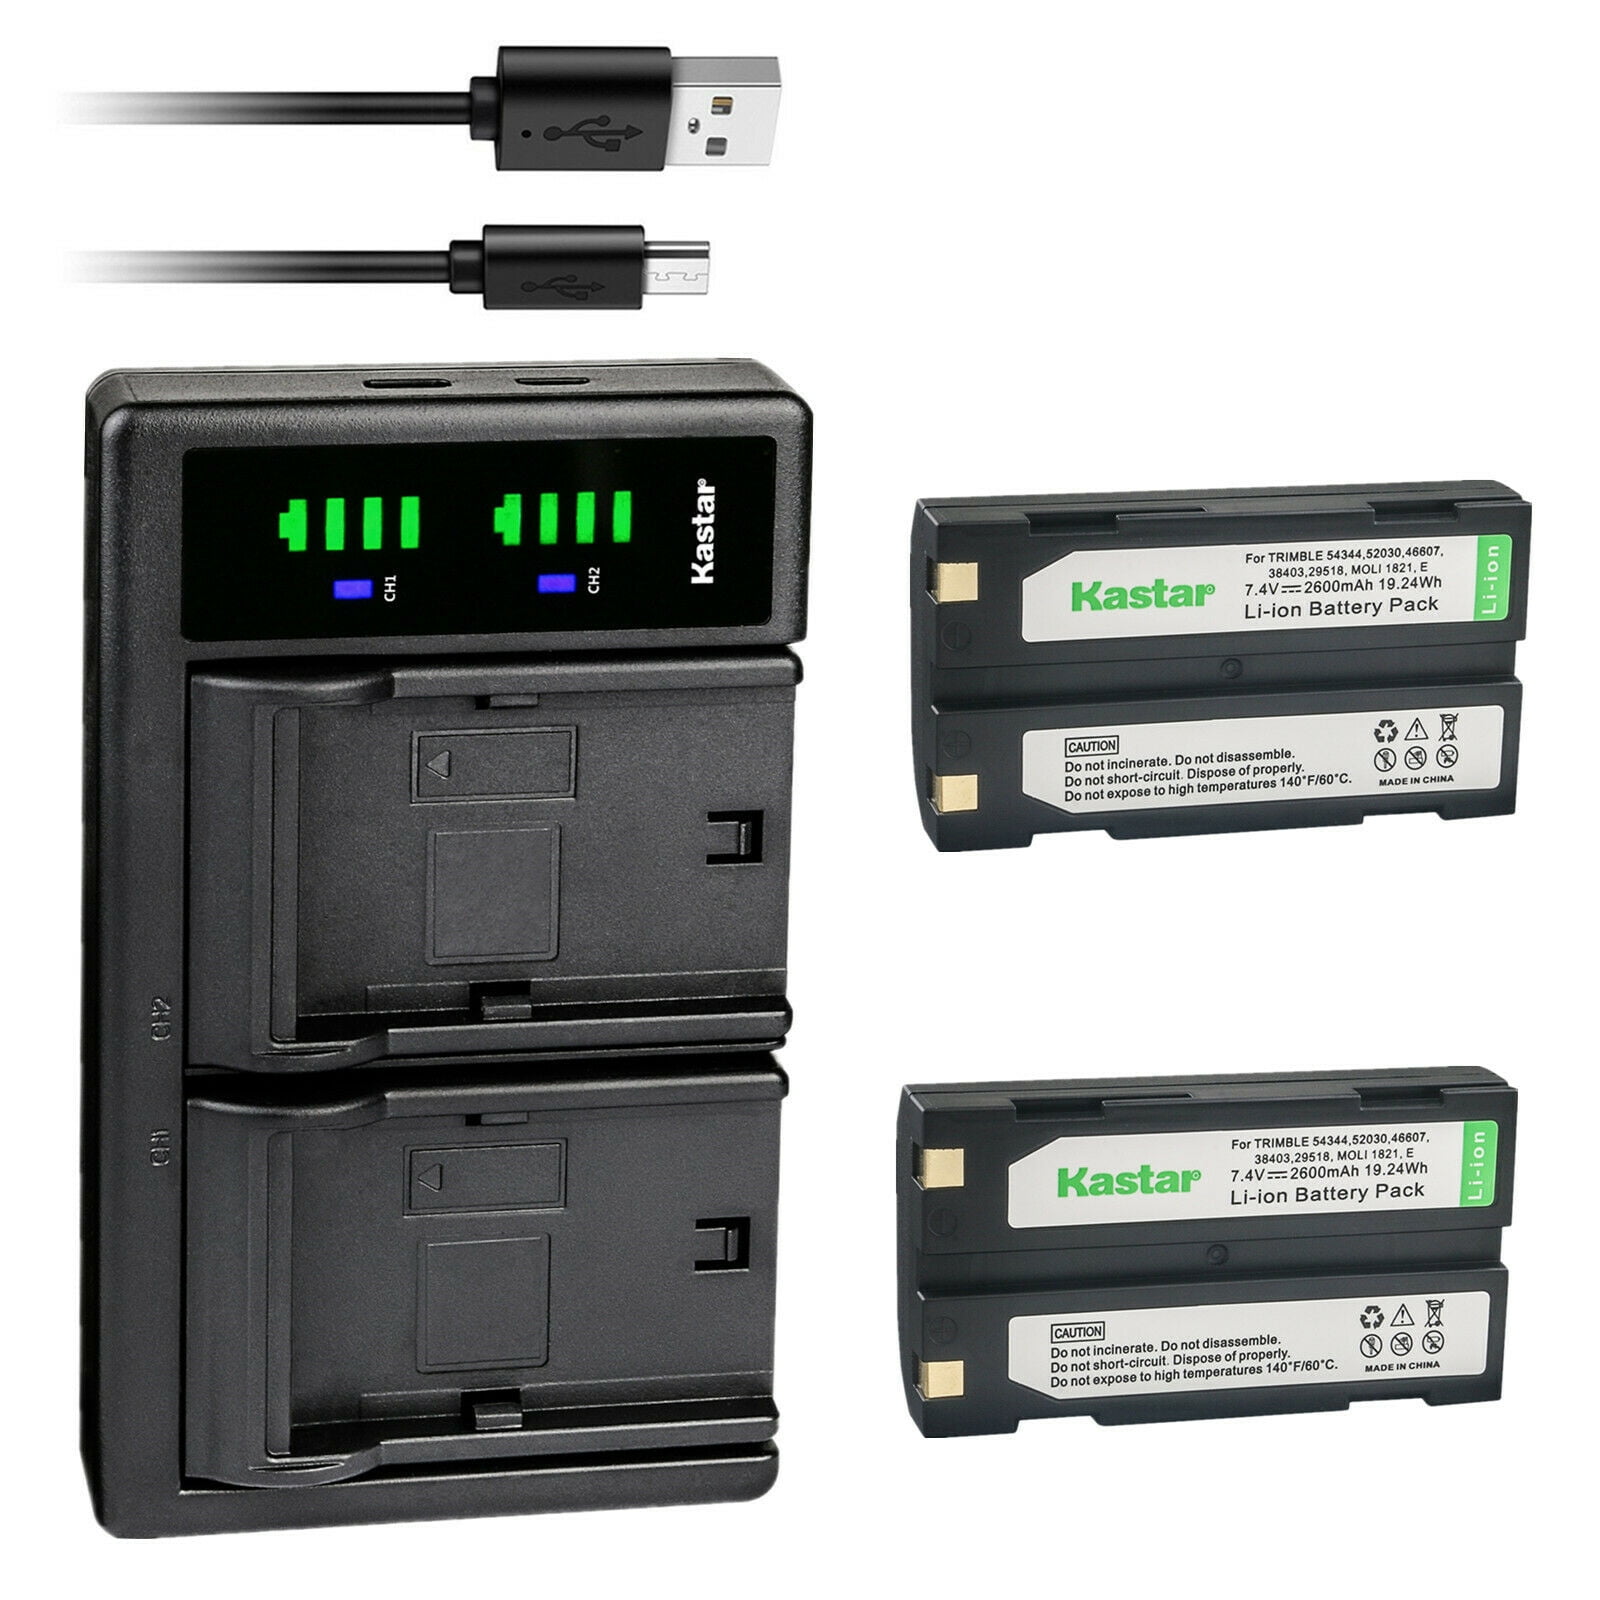 4-Slot Battery Charger Station Dock for Trimble 5700 5800 R8 R7 R6 GNSS Battery 